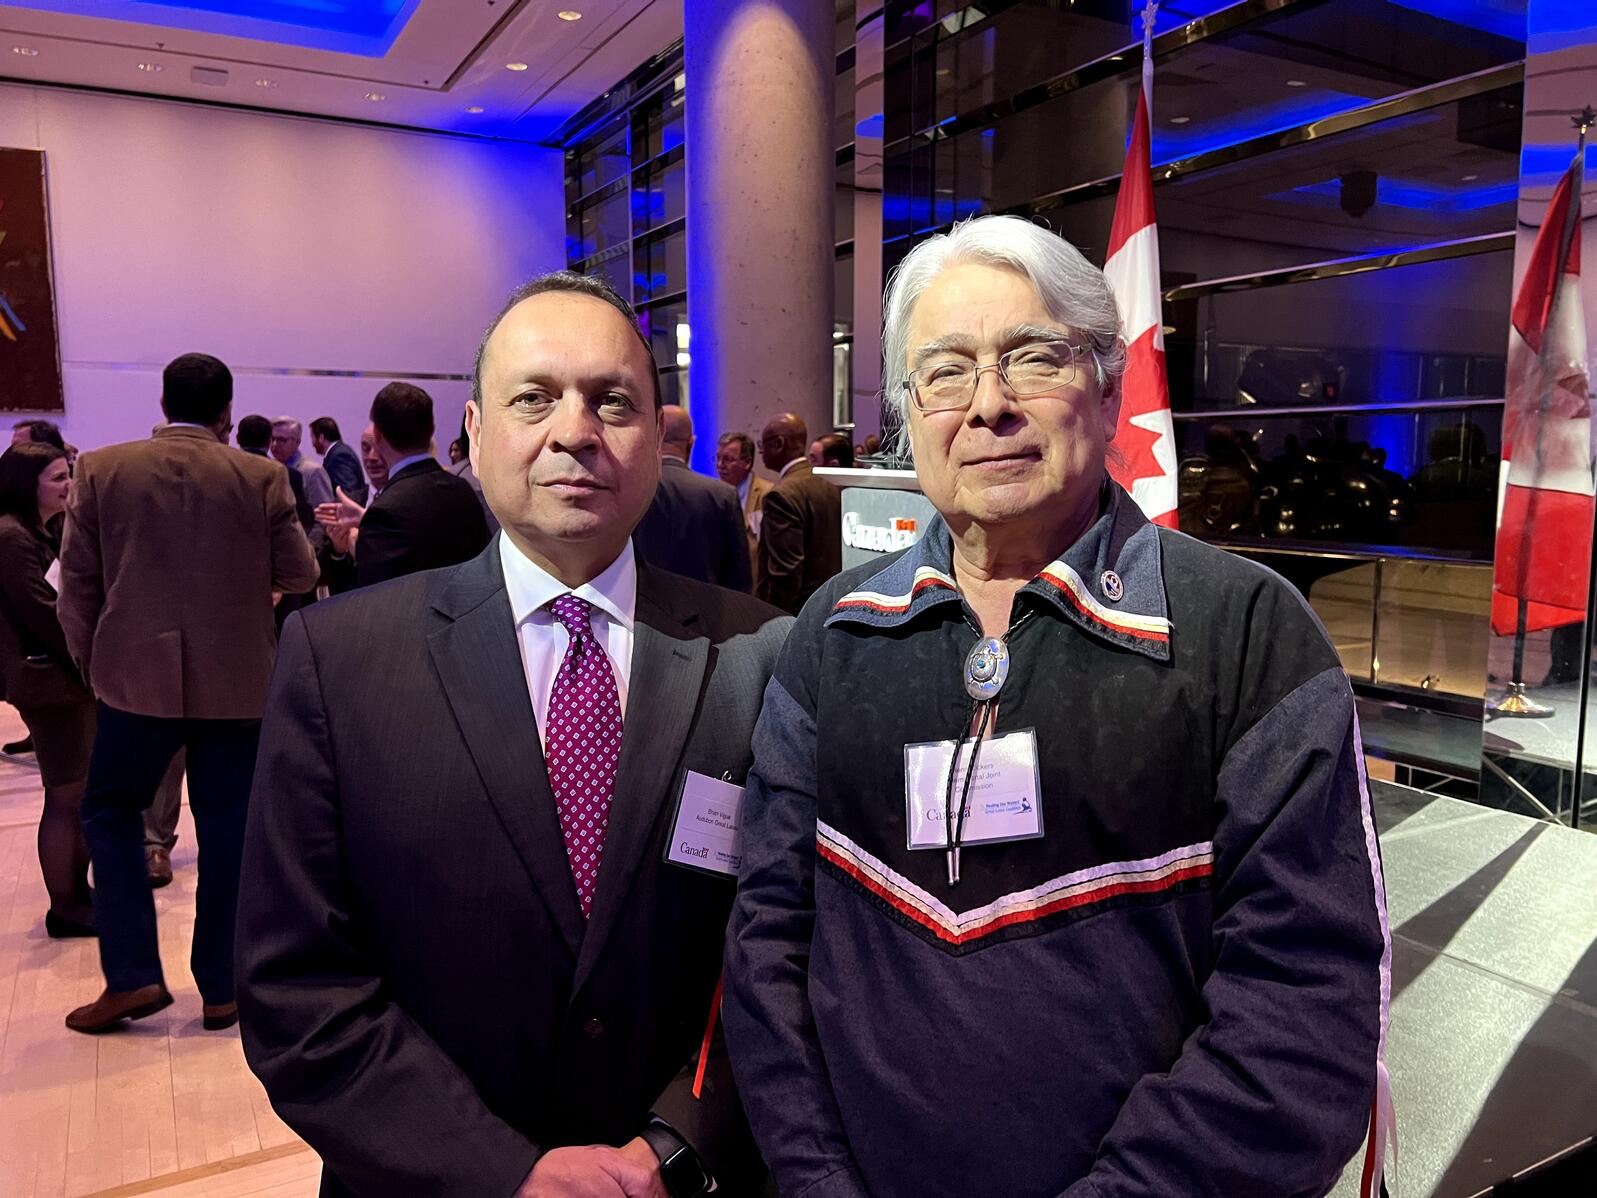 (Left to Right) Brian Vigue, Policy Director of Freshwater for Audubon Great Lakes and Oneida Tribal member and Henry Lickers, Canadian Commissioner for the International Joint Commission and Seneca Tribal member, at Great Lakes Day. Photo: Audubon Great Lakes